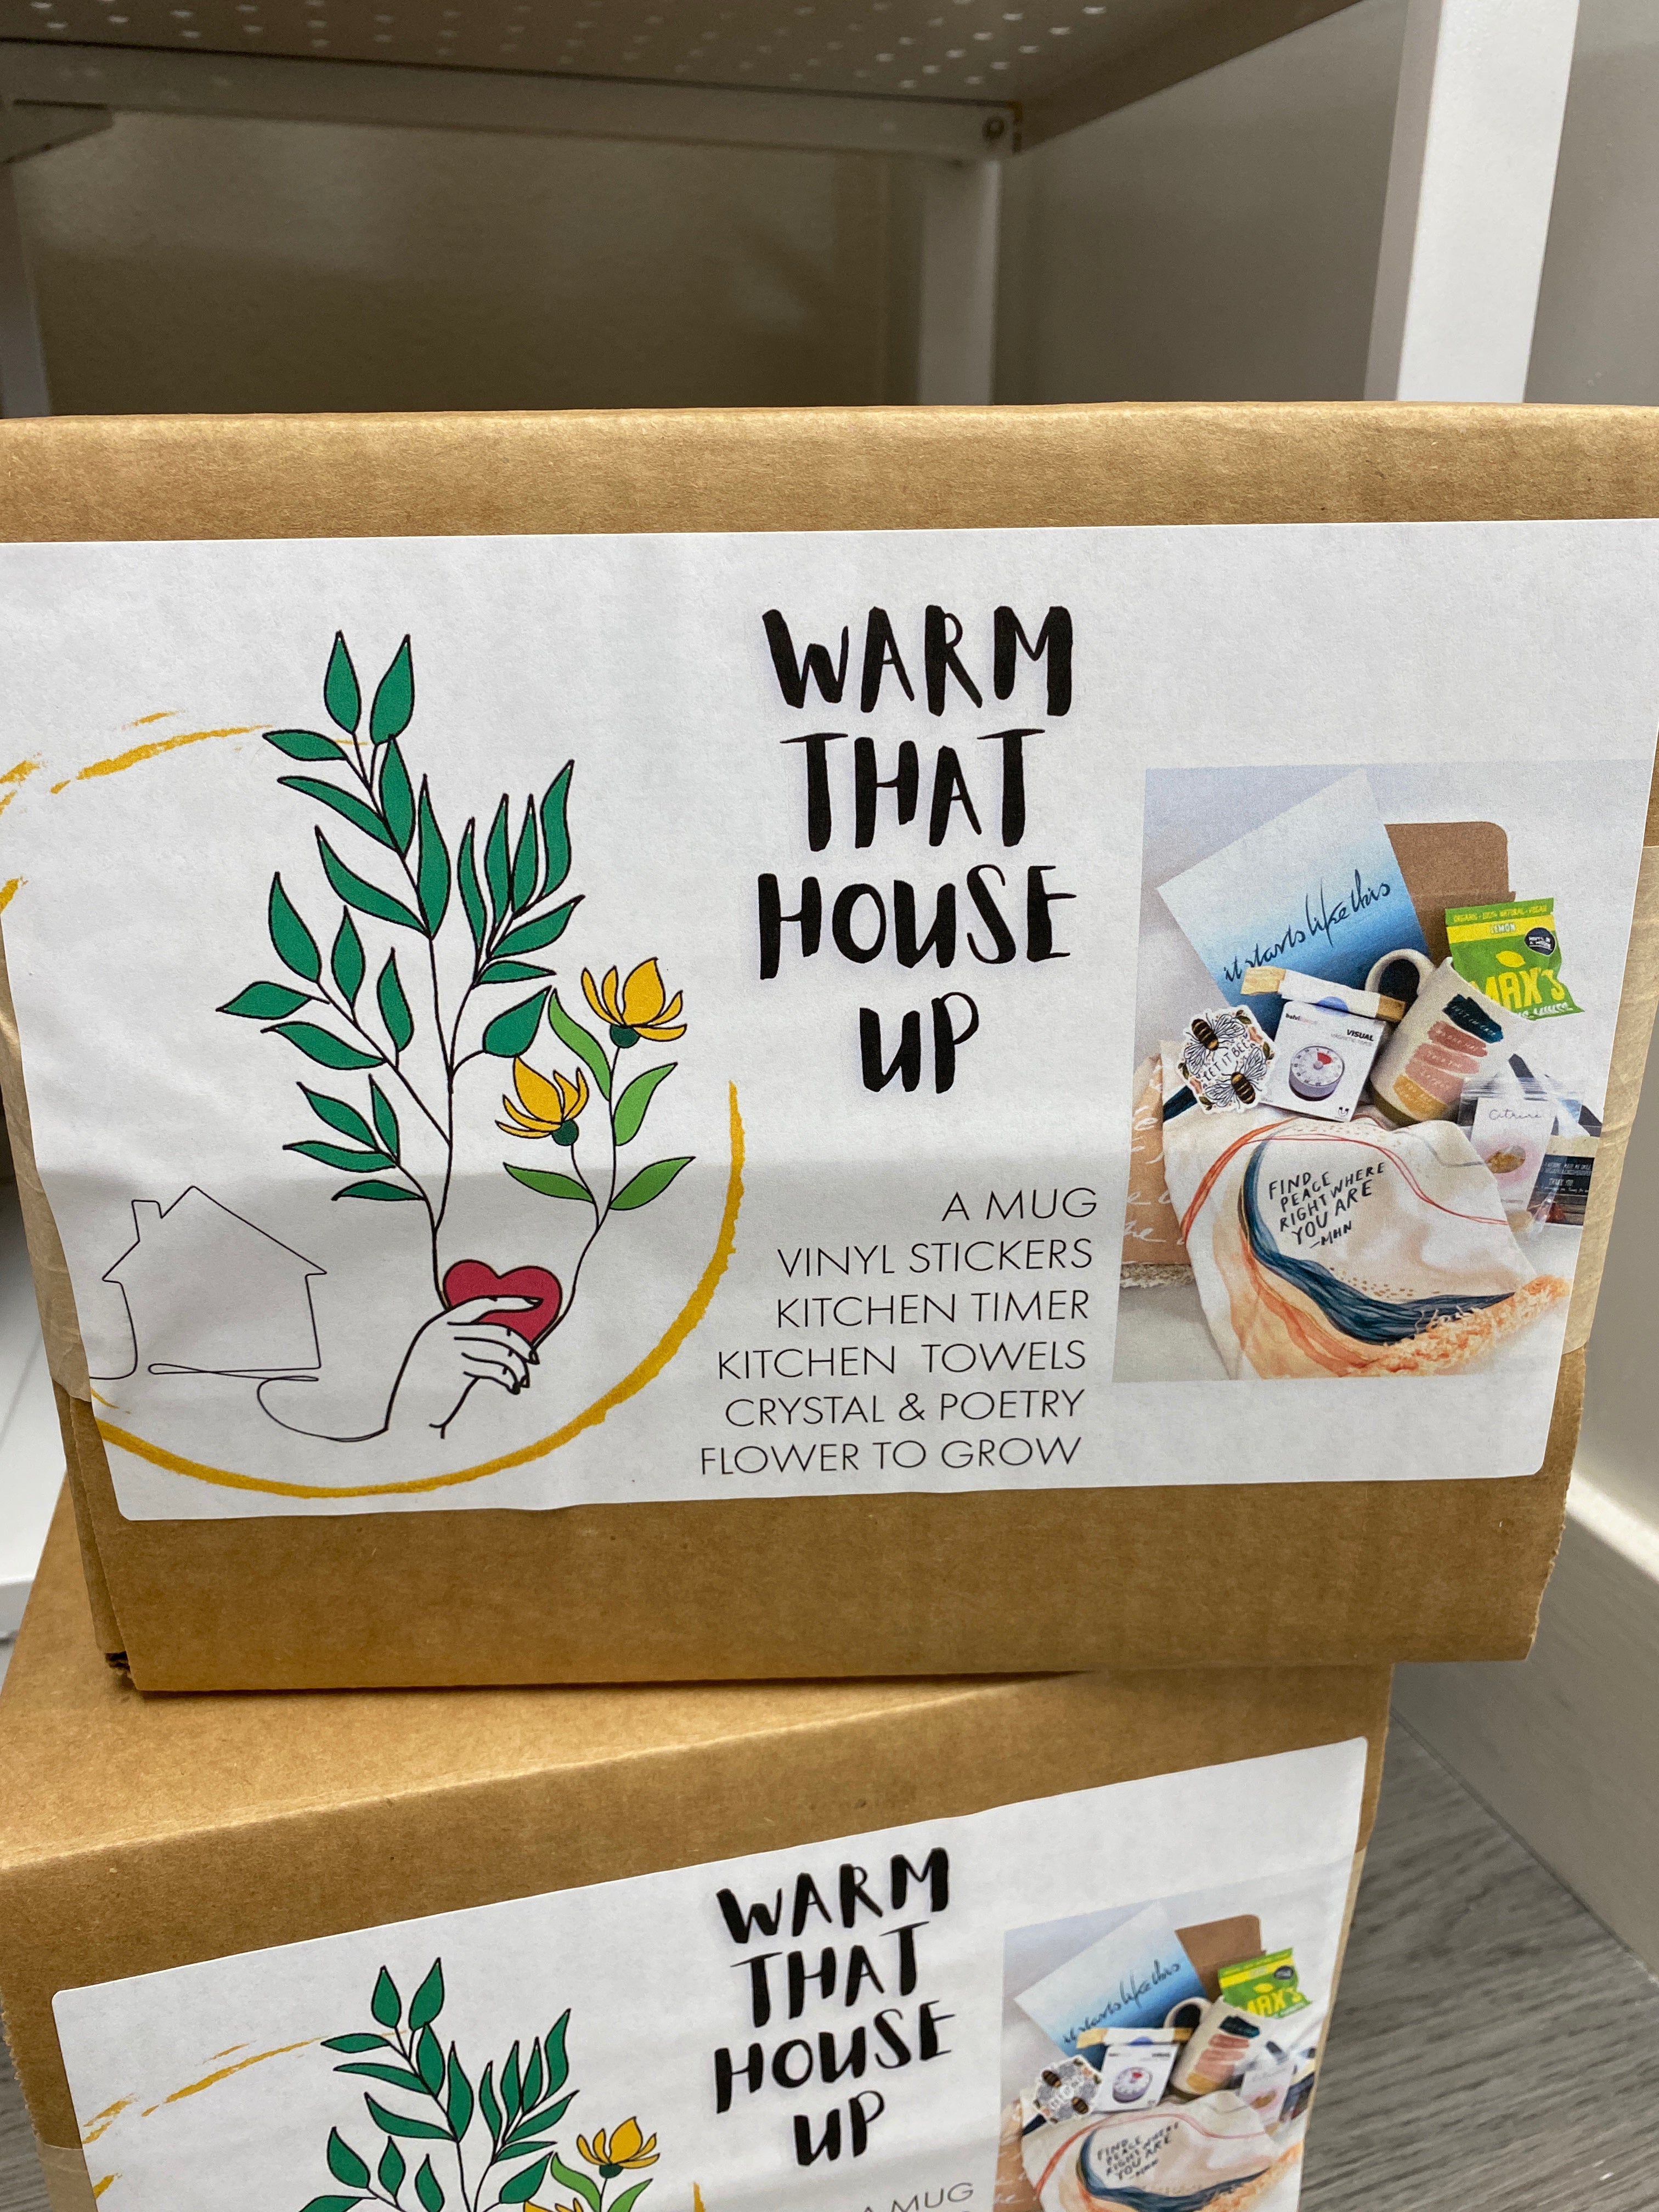 Warm that home up box